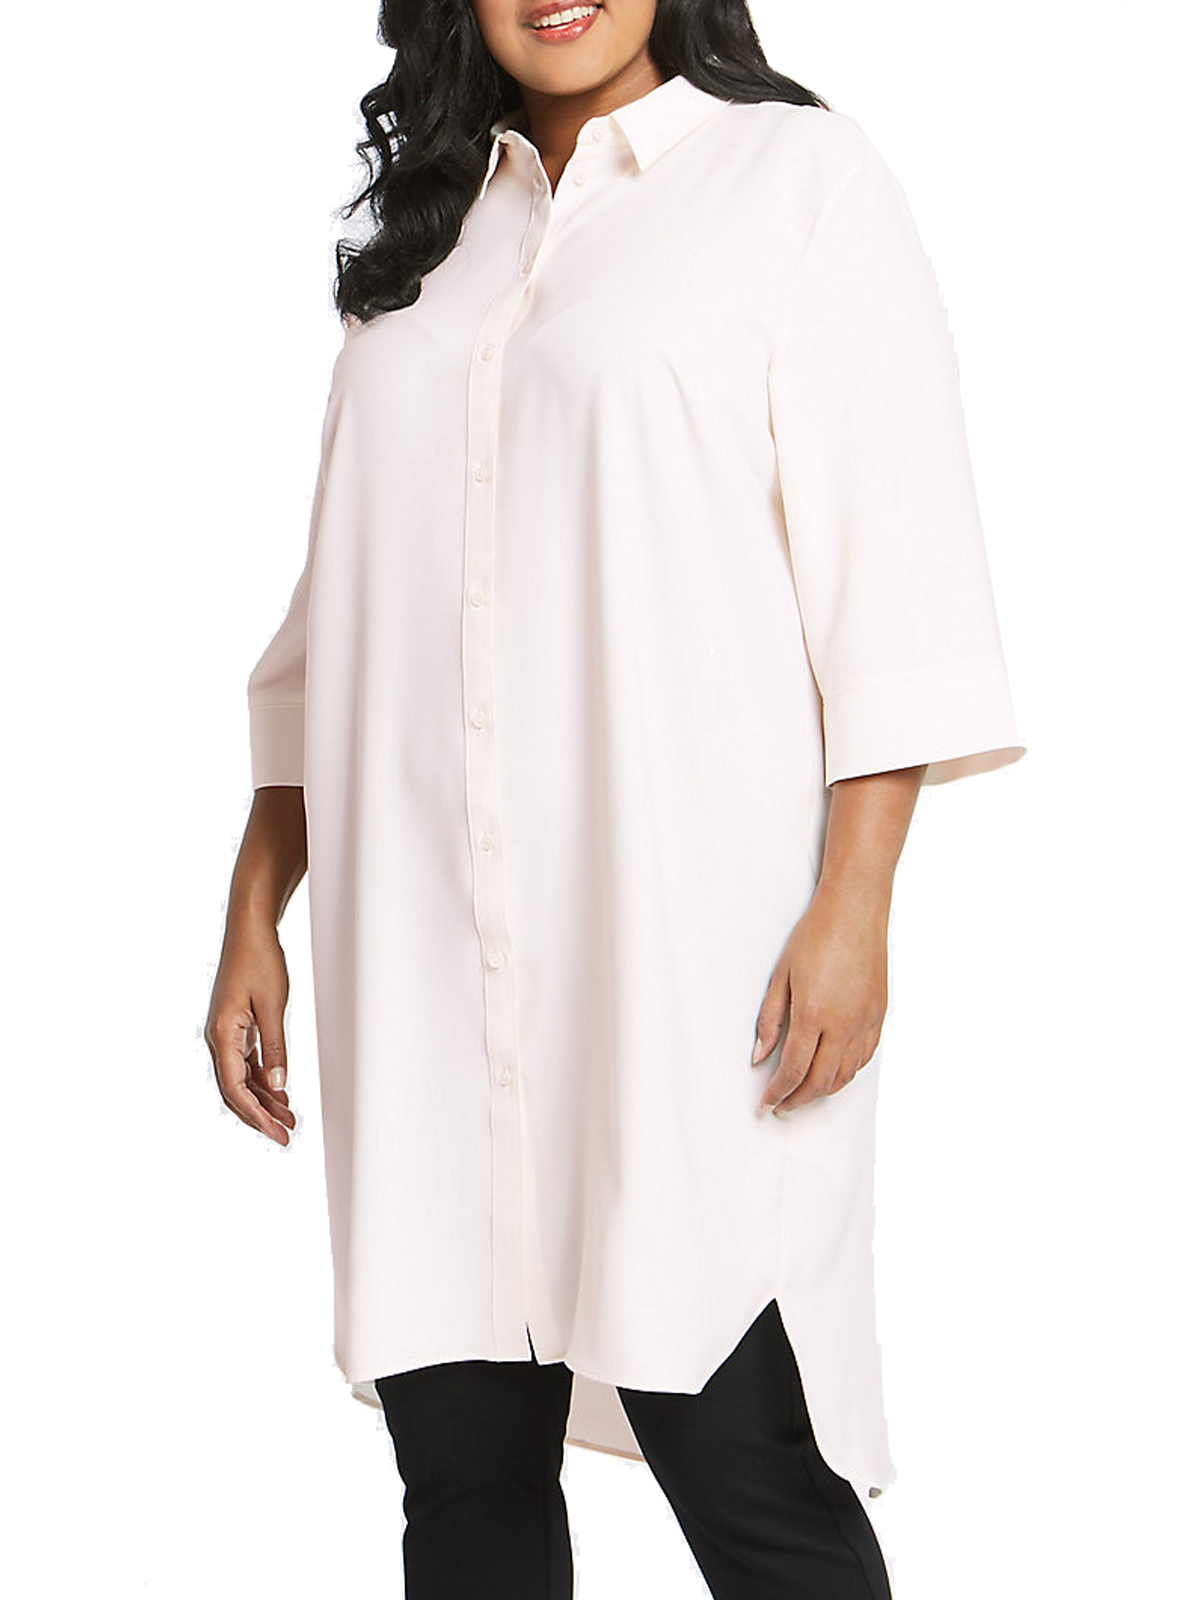 Marks and Spencer - - M&5 CREAM Longline Long Sleeve Shirt - Plus Size ...